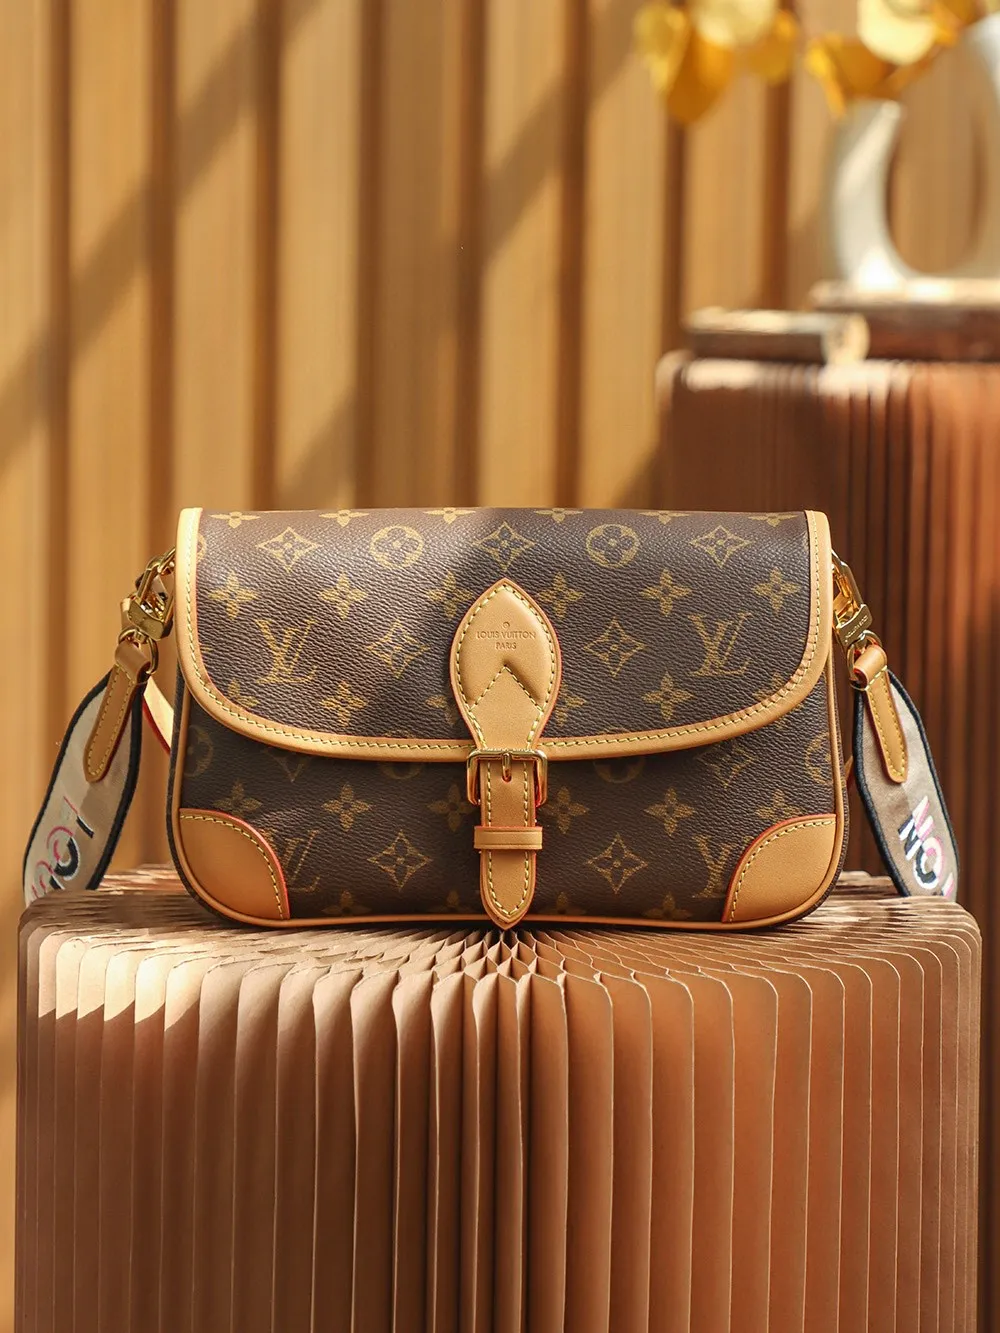 Nano speedy inspo pics because I'm leaning towards buying this bag :  r/Louisvuitton